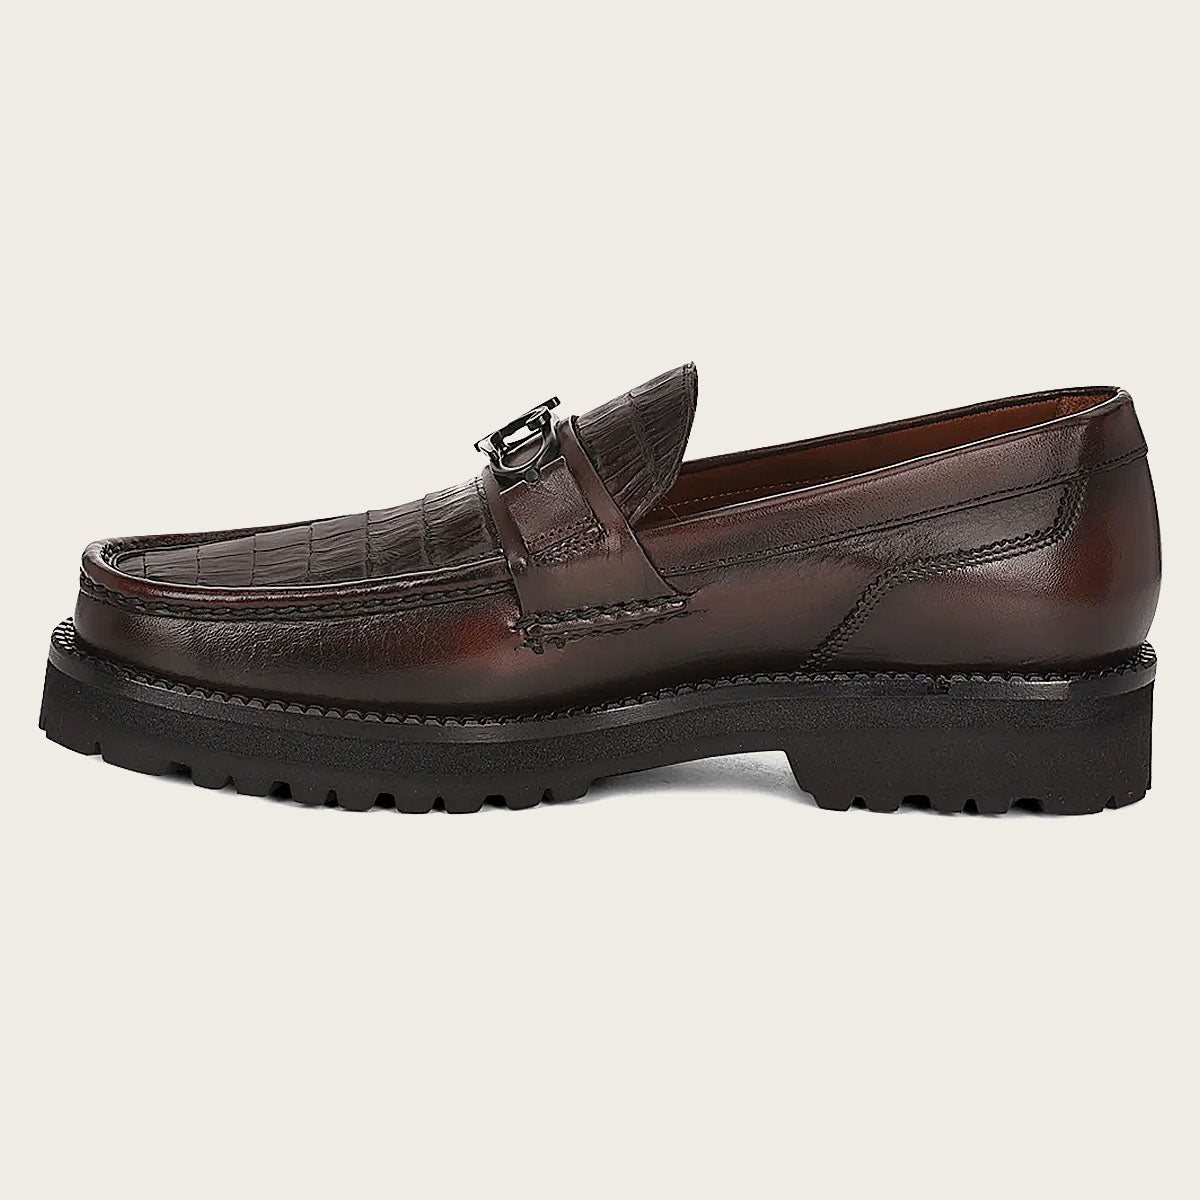 brown leather men's loafer shoes, carefully crafted from genuine Cayman leather and bovine leather